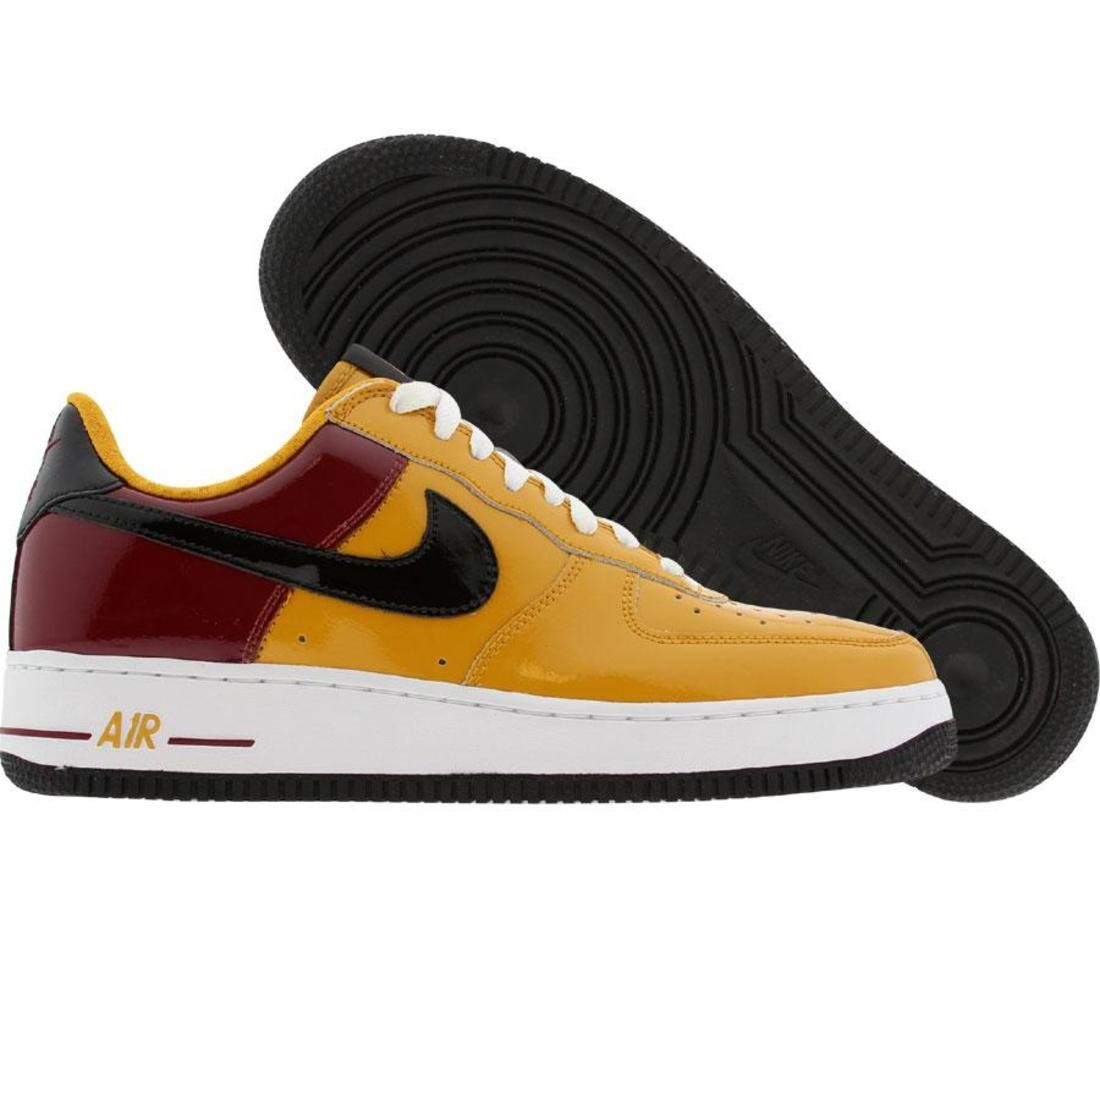 Nike Air Force 1 Low Premium World Cup Portugal Edition (gold leaf / black / team red / white)